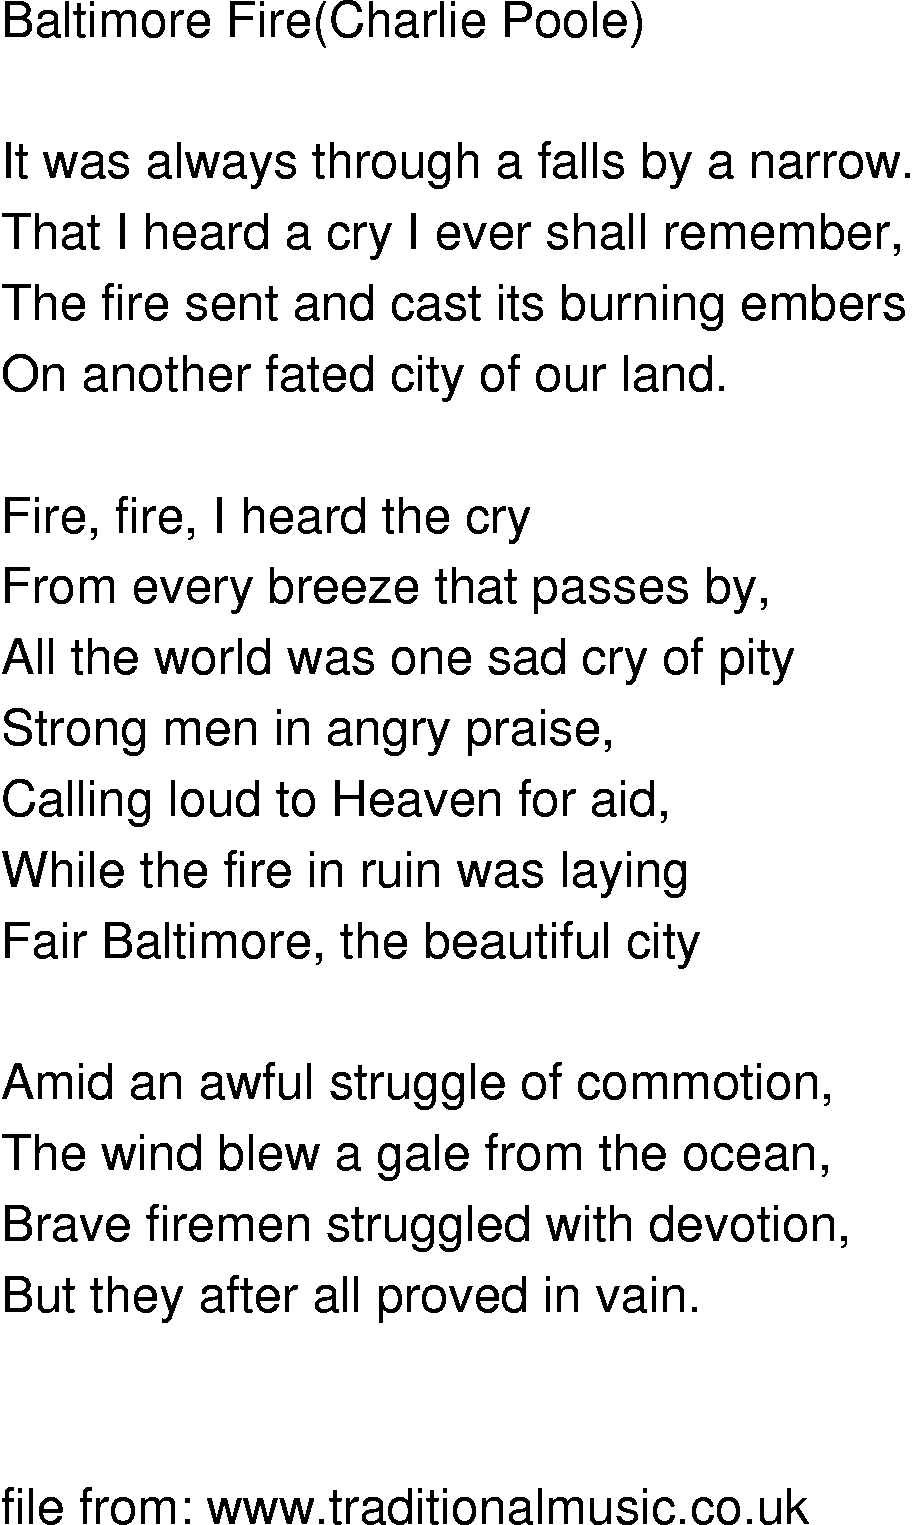 Old-Time (oldtimey) Song Lyrics - baltimore fire